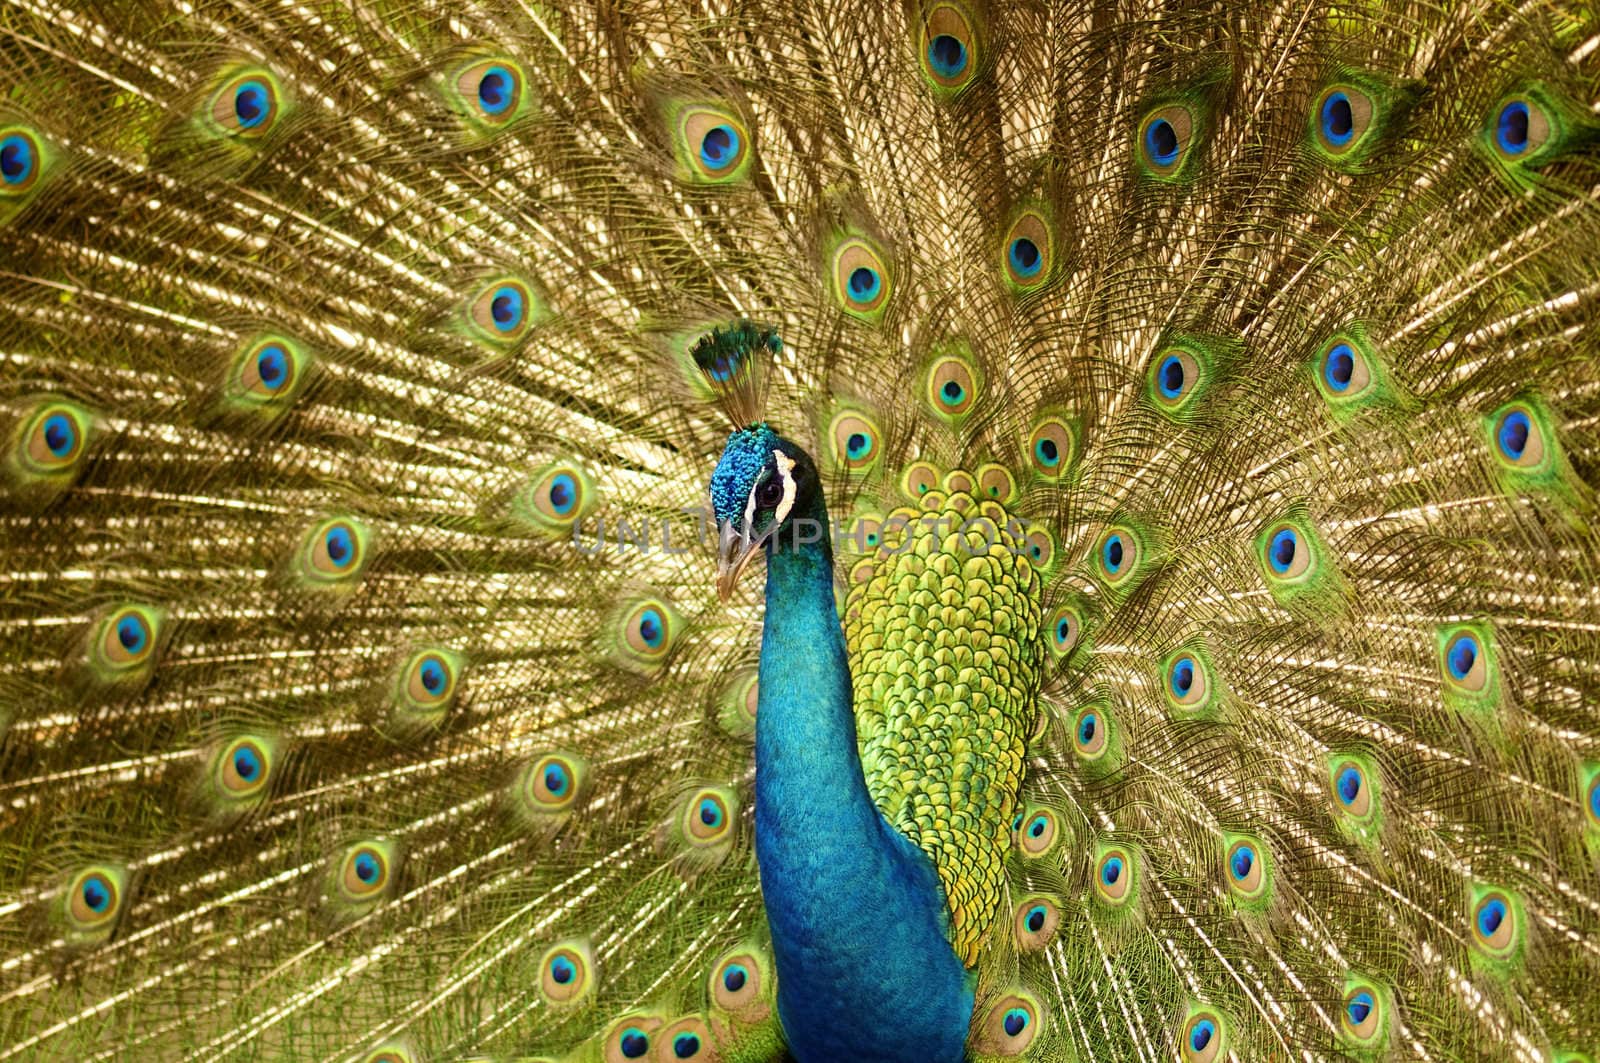 Portrait of Peacock with Feathers Out.